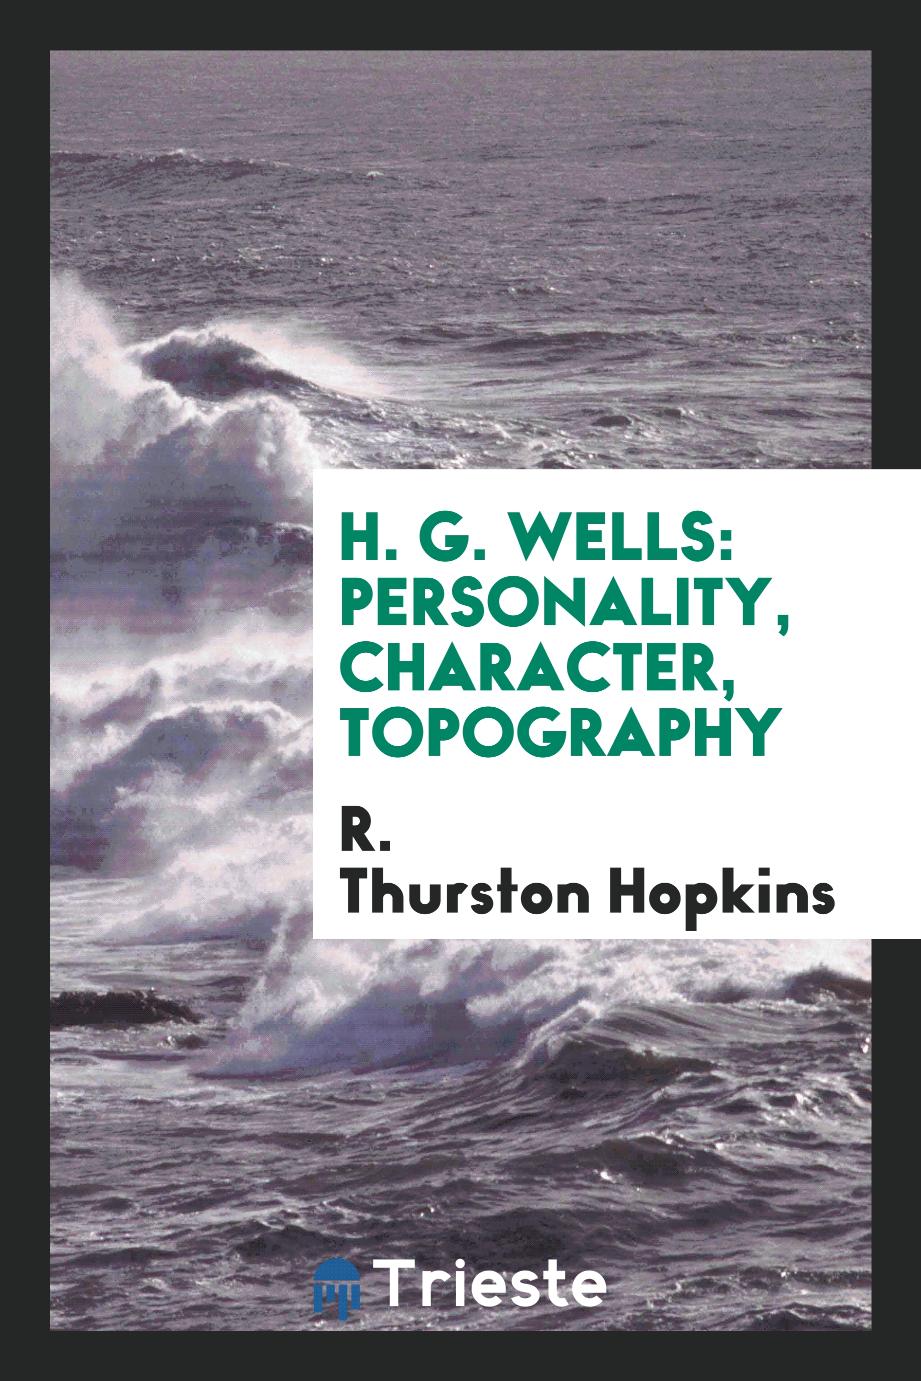 H. G. Wells: personality, character, topography